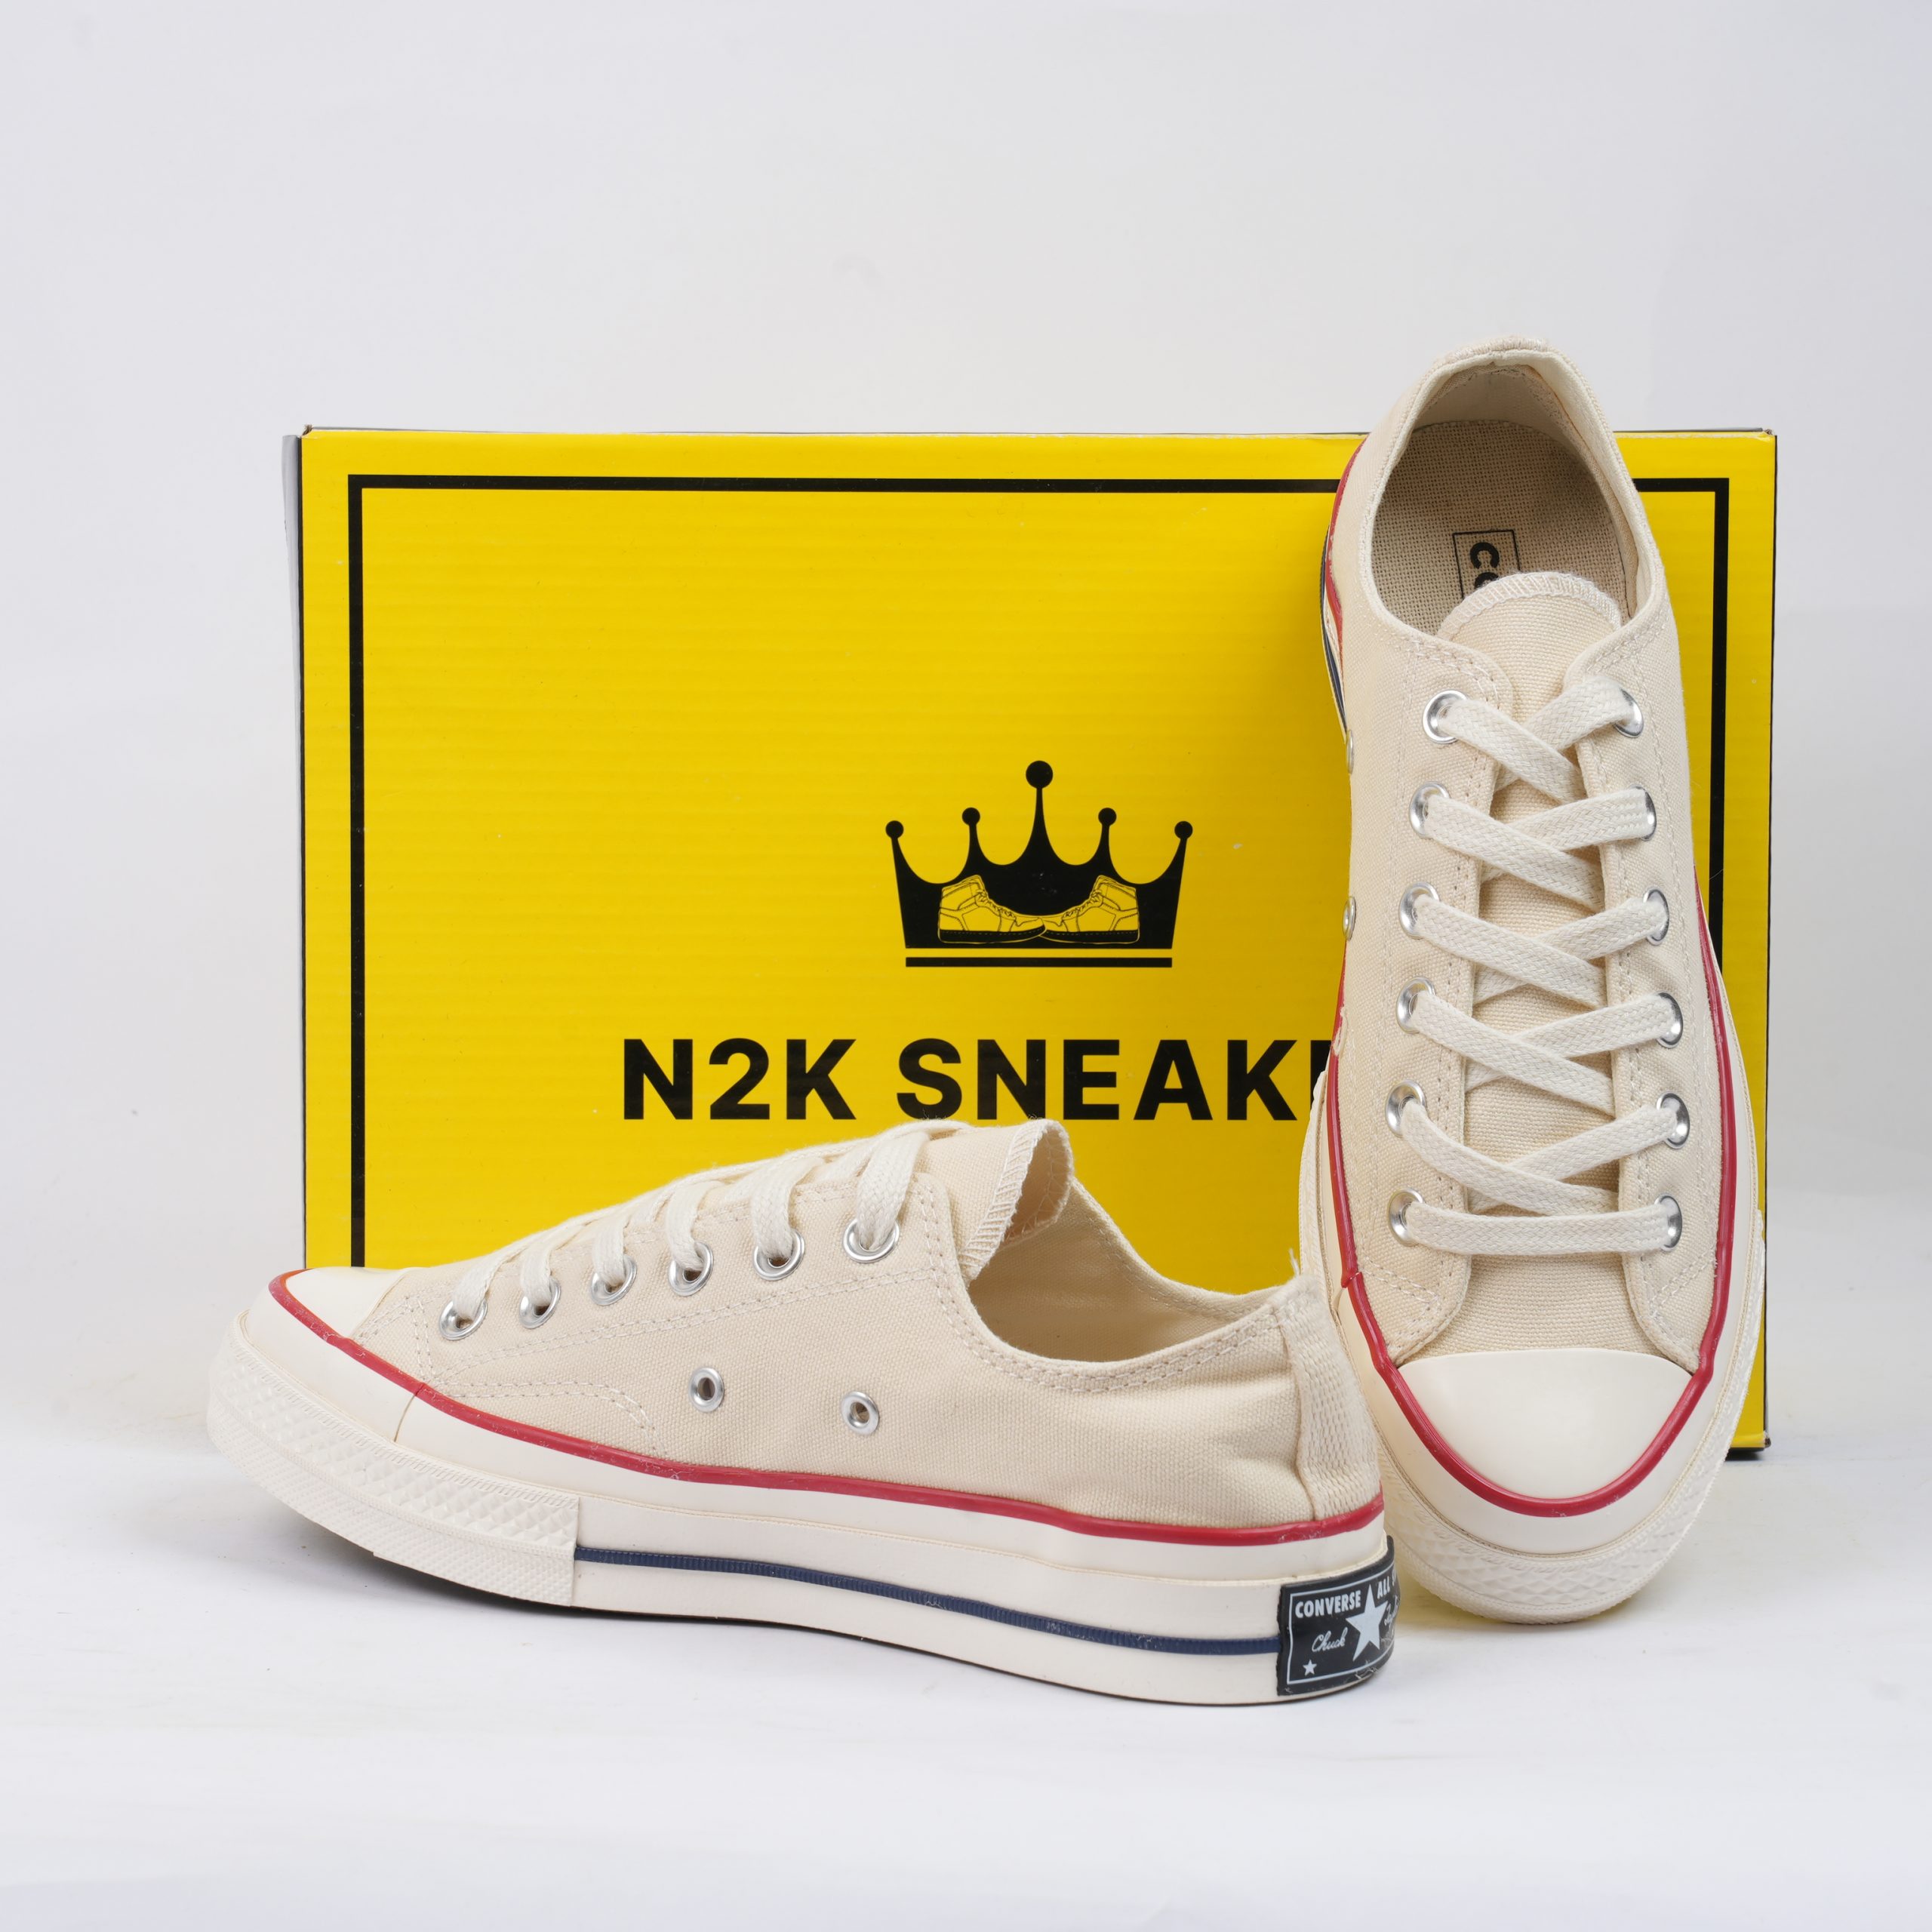 Converse Chuck Taylor All Star 1970s White Low Rep 1:1 - N2K Sneaker